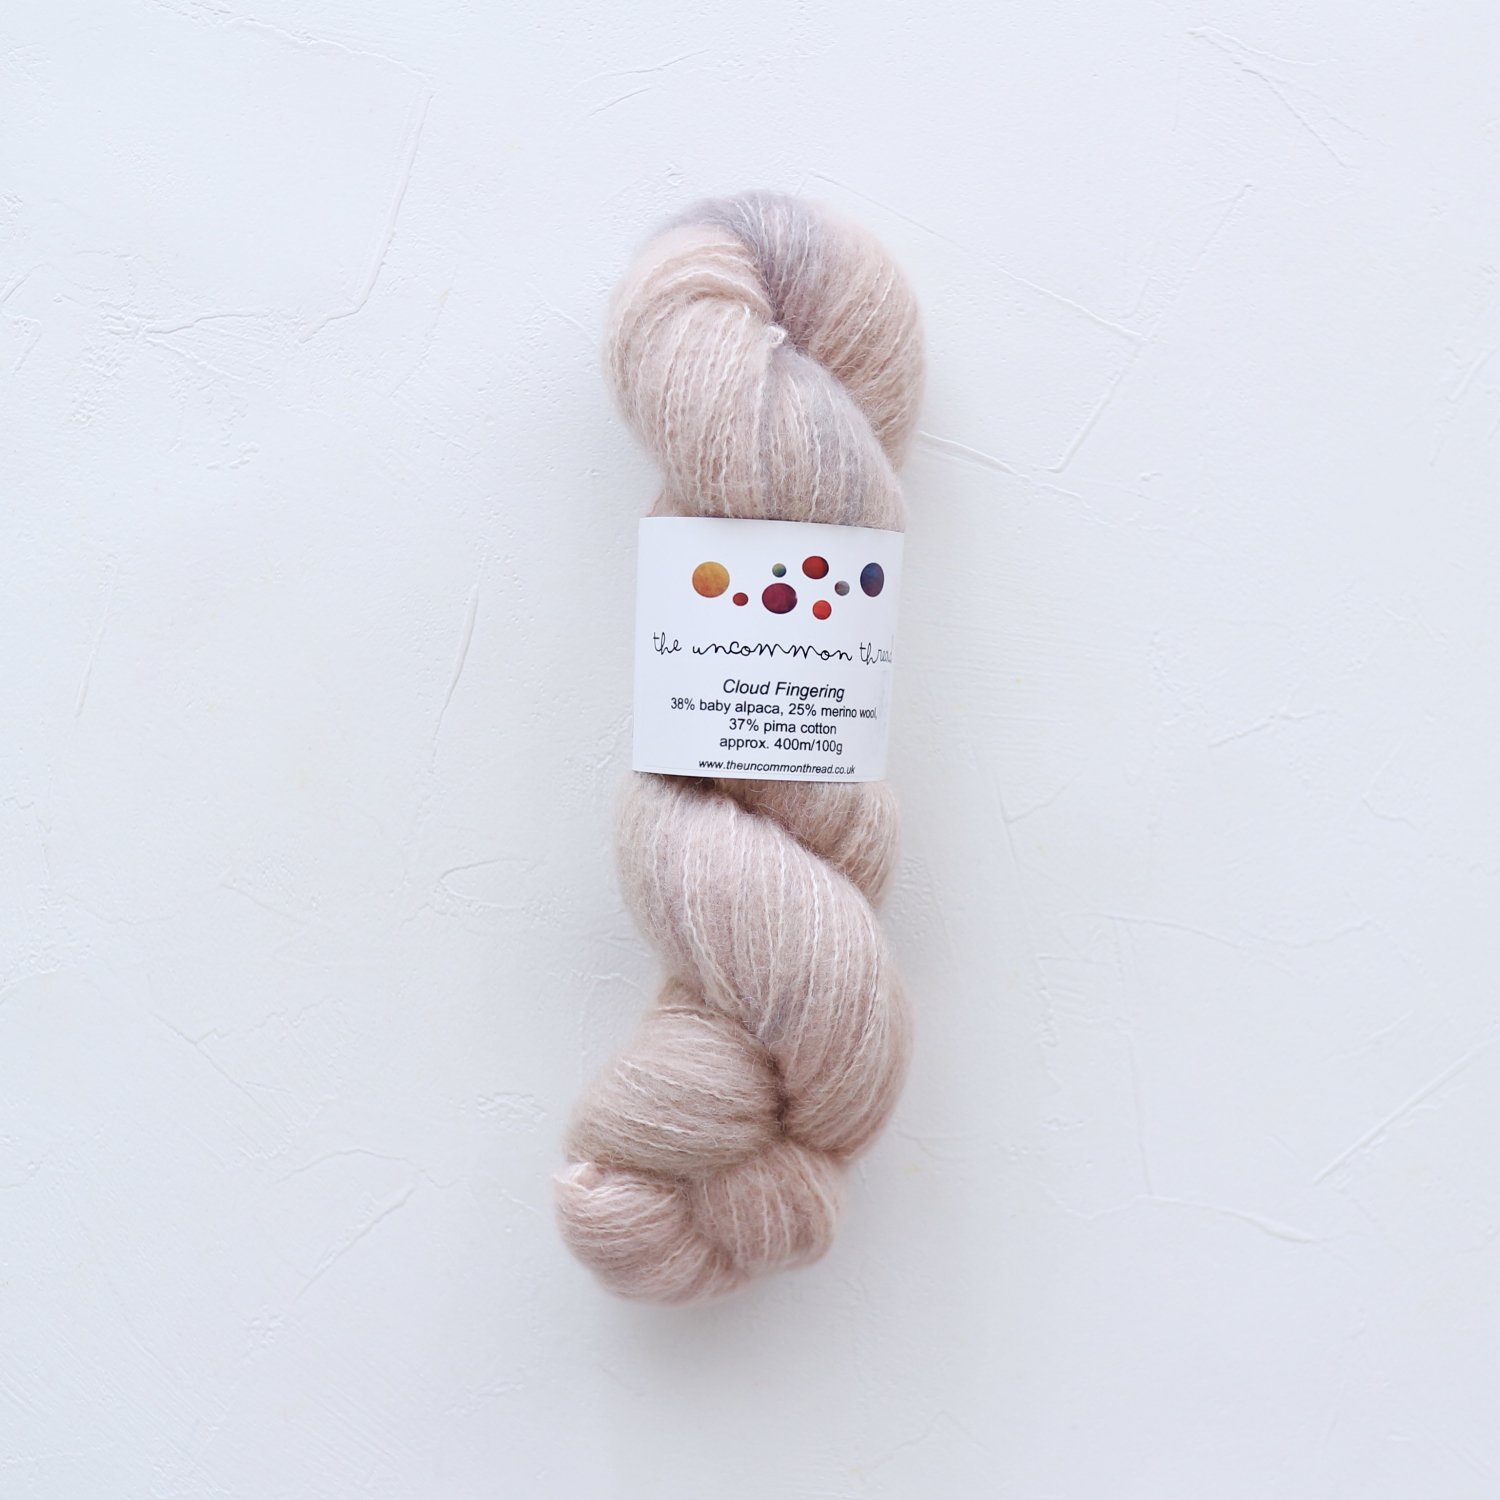 【The Uncommon Thread】<br>Cloud Fingering<br>Tea Smoked